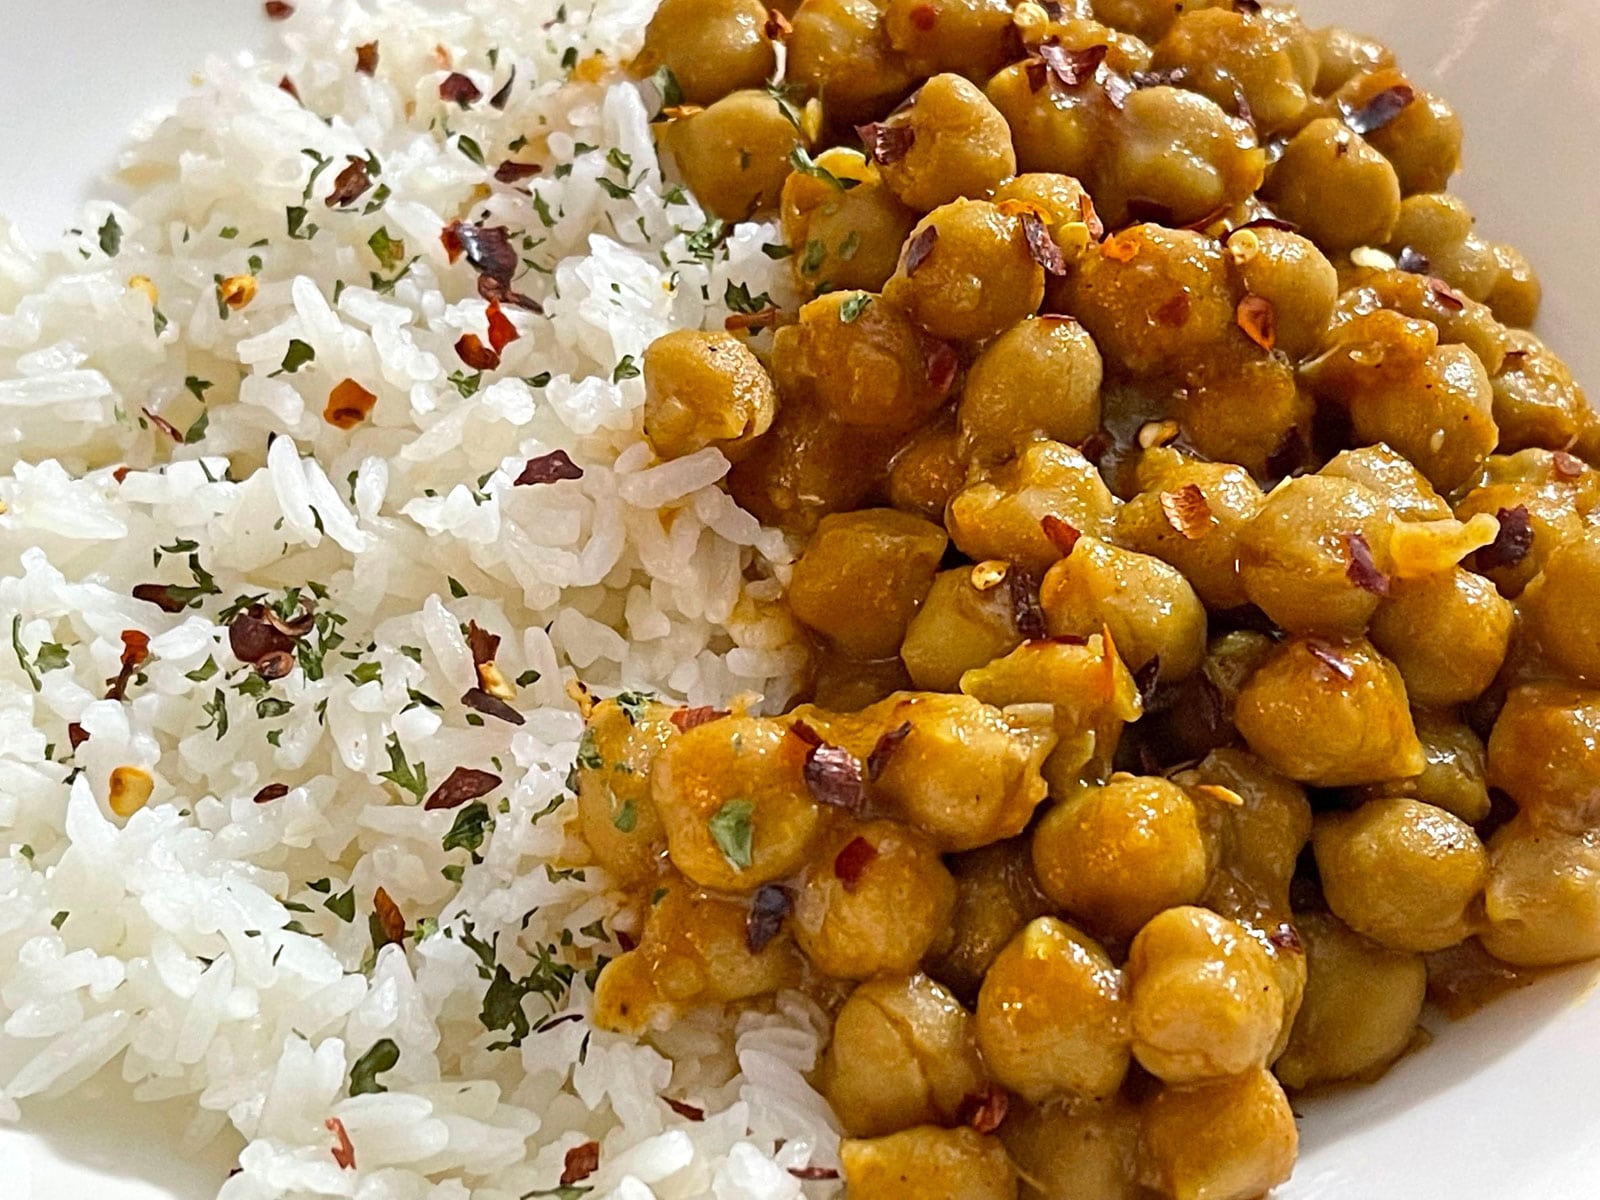 white jasmine seasoned with red chili flakes and served along with chickpea curry